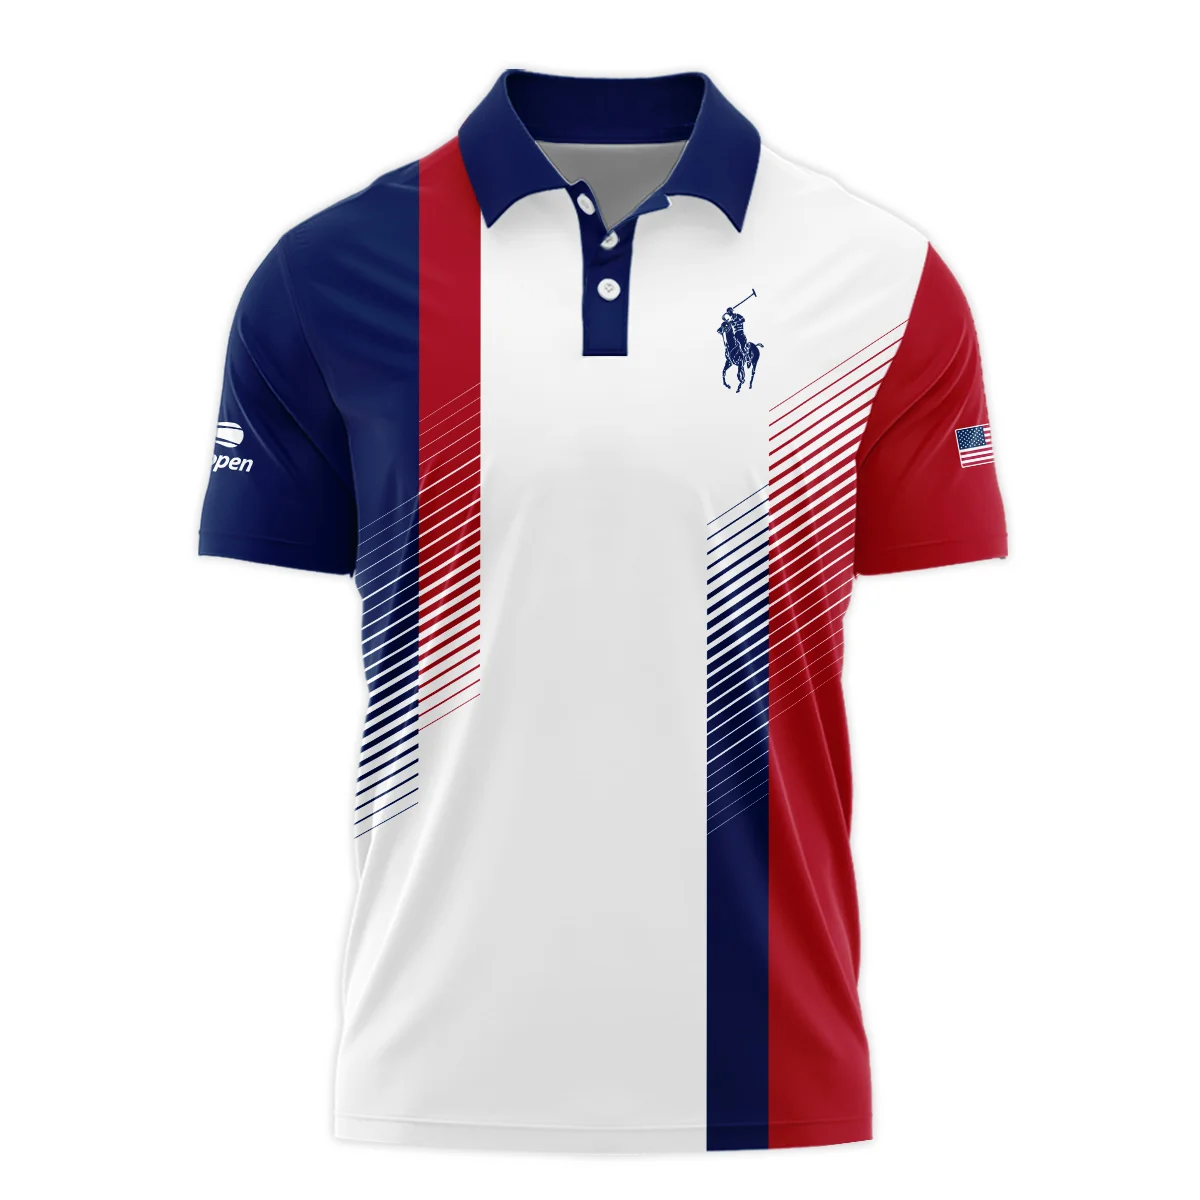 Ralph Lauren Blue Red Straight Line White US Open Tennis Champions Vneck Polo Shirt Style Classic Polo Shirt For Men